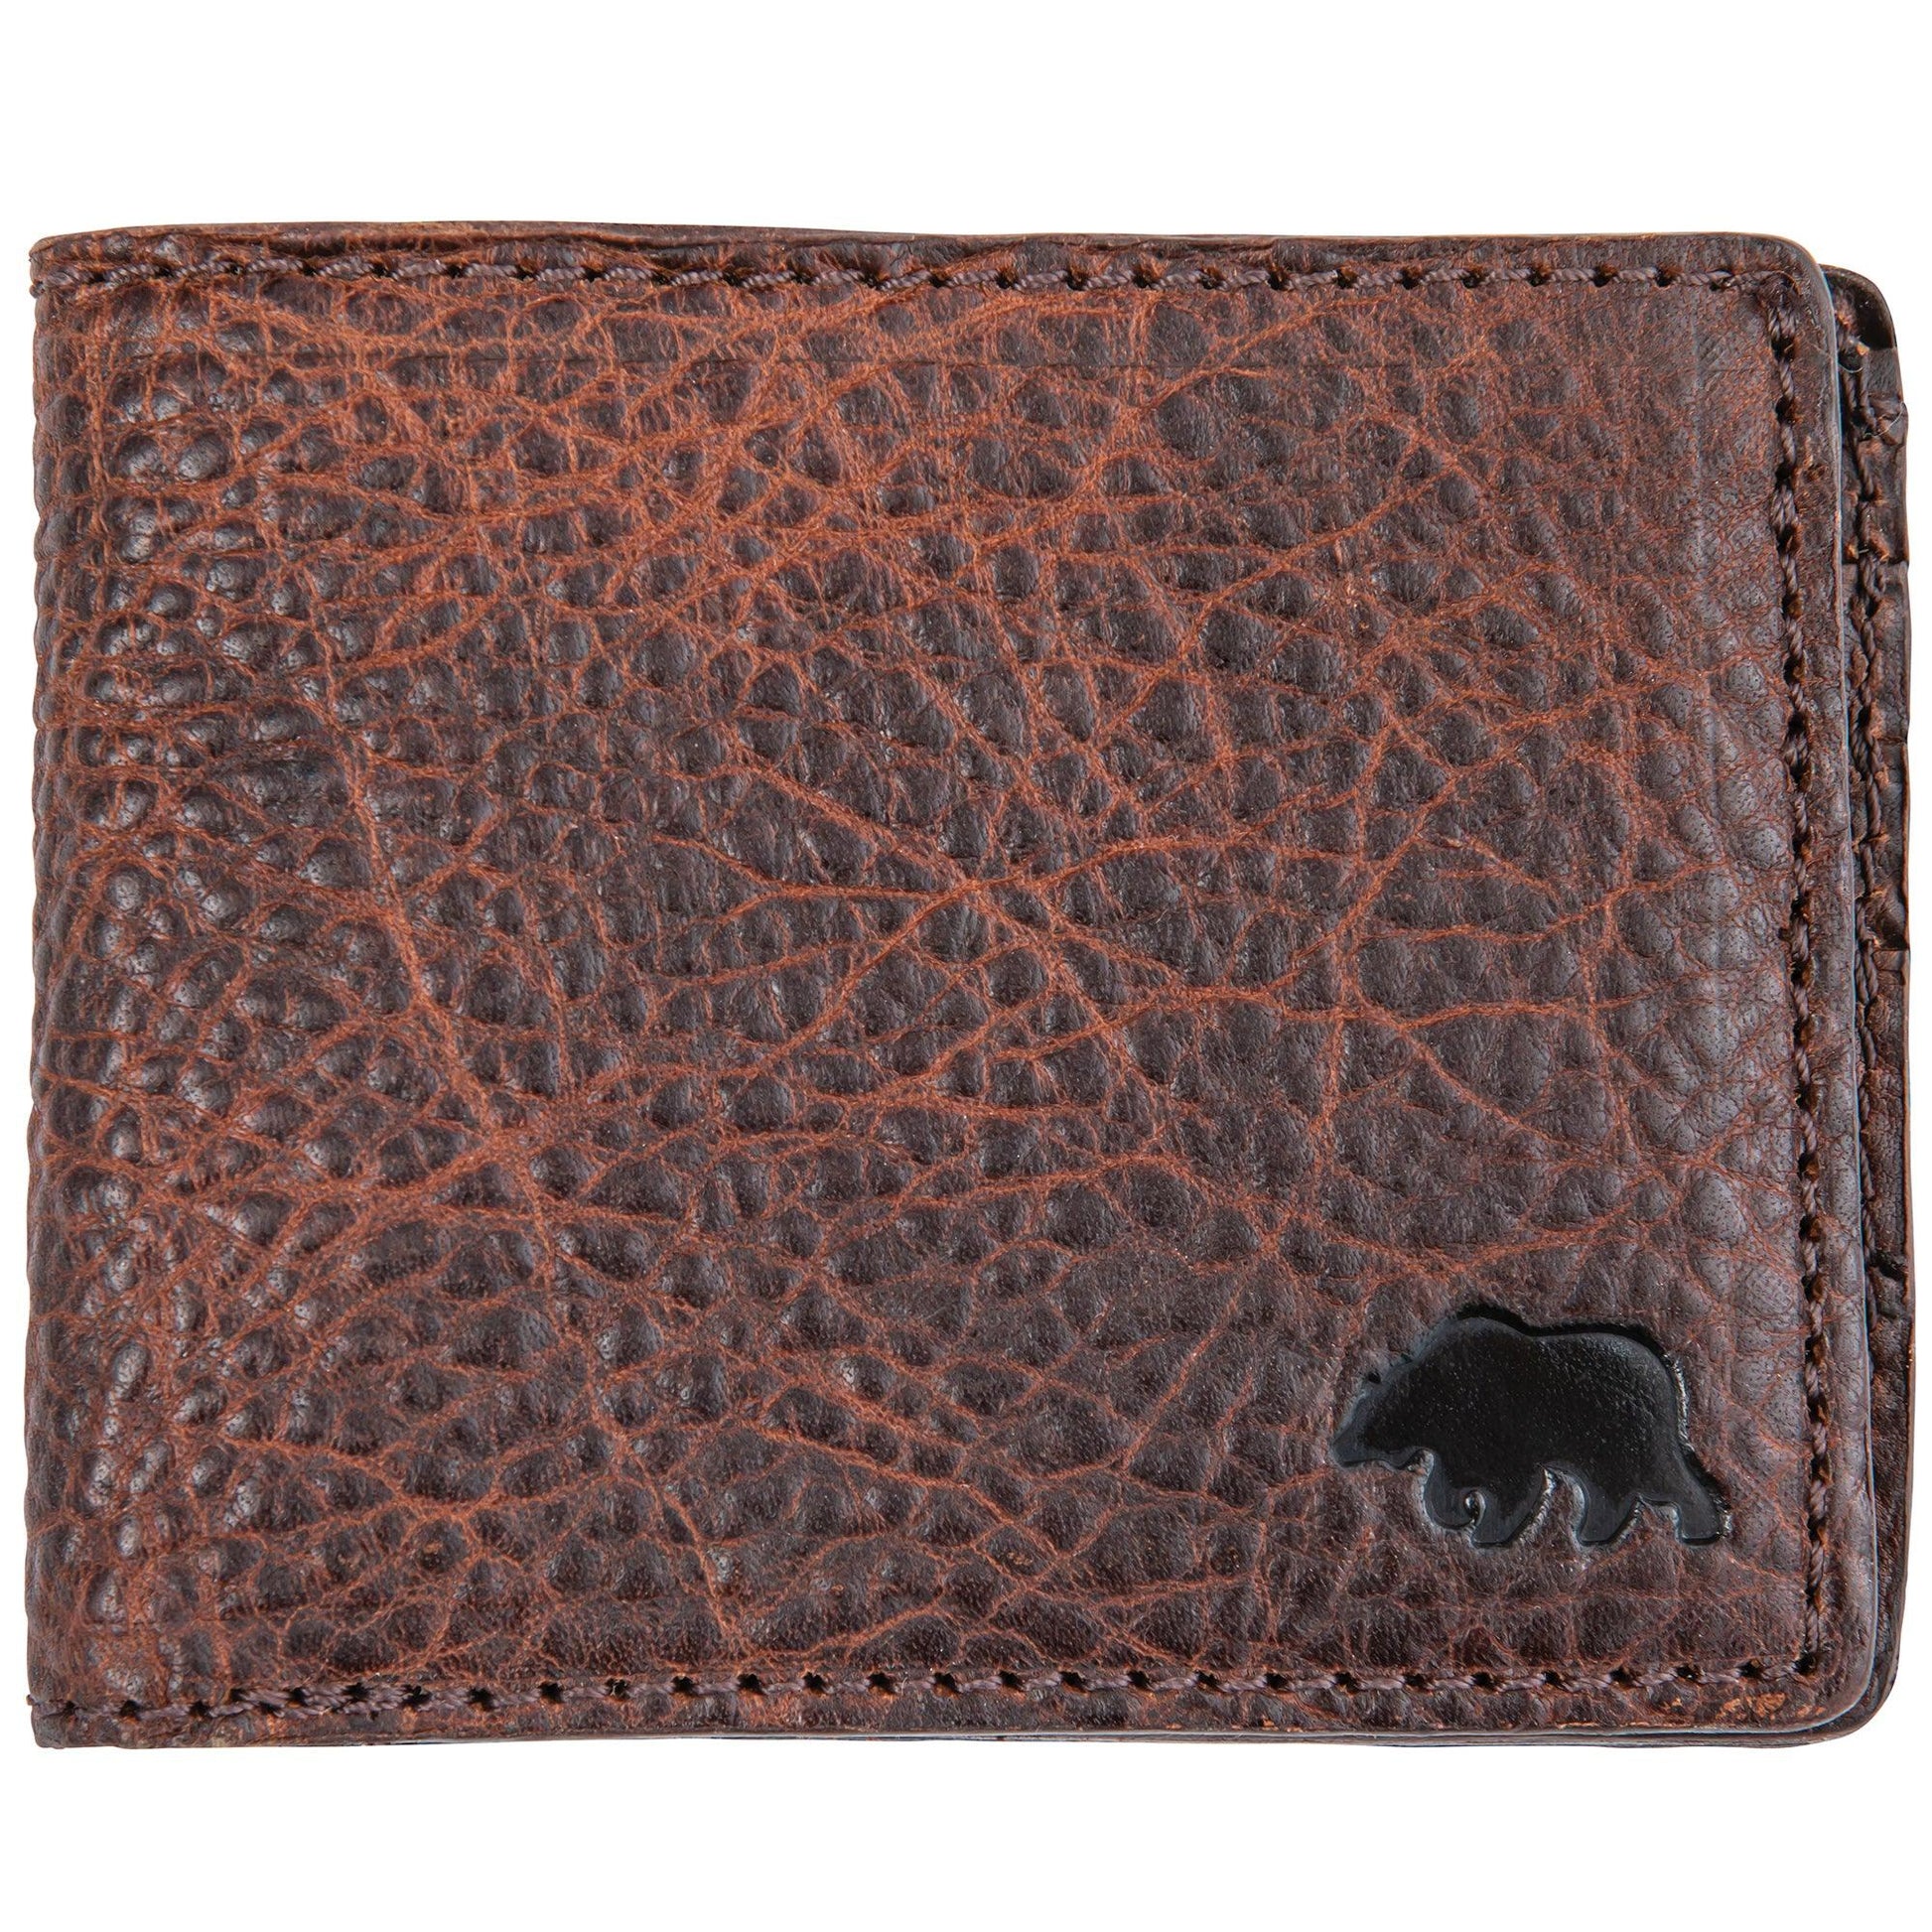 Campaign Leather Bifold Wallet - Onward Reserve